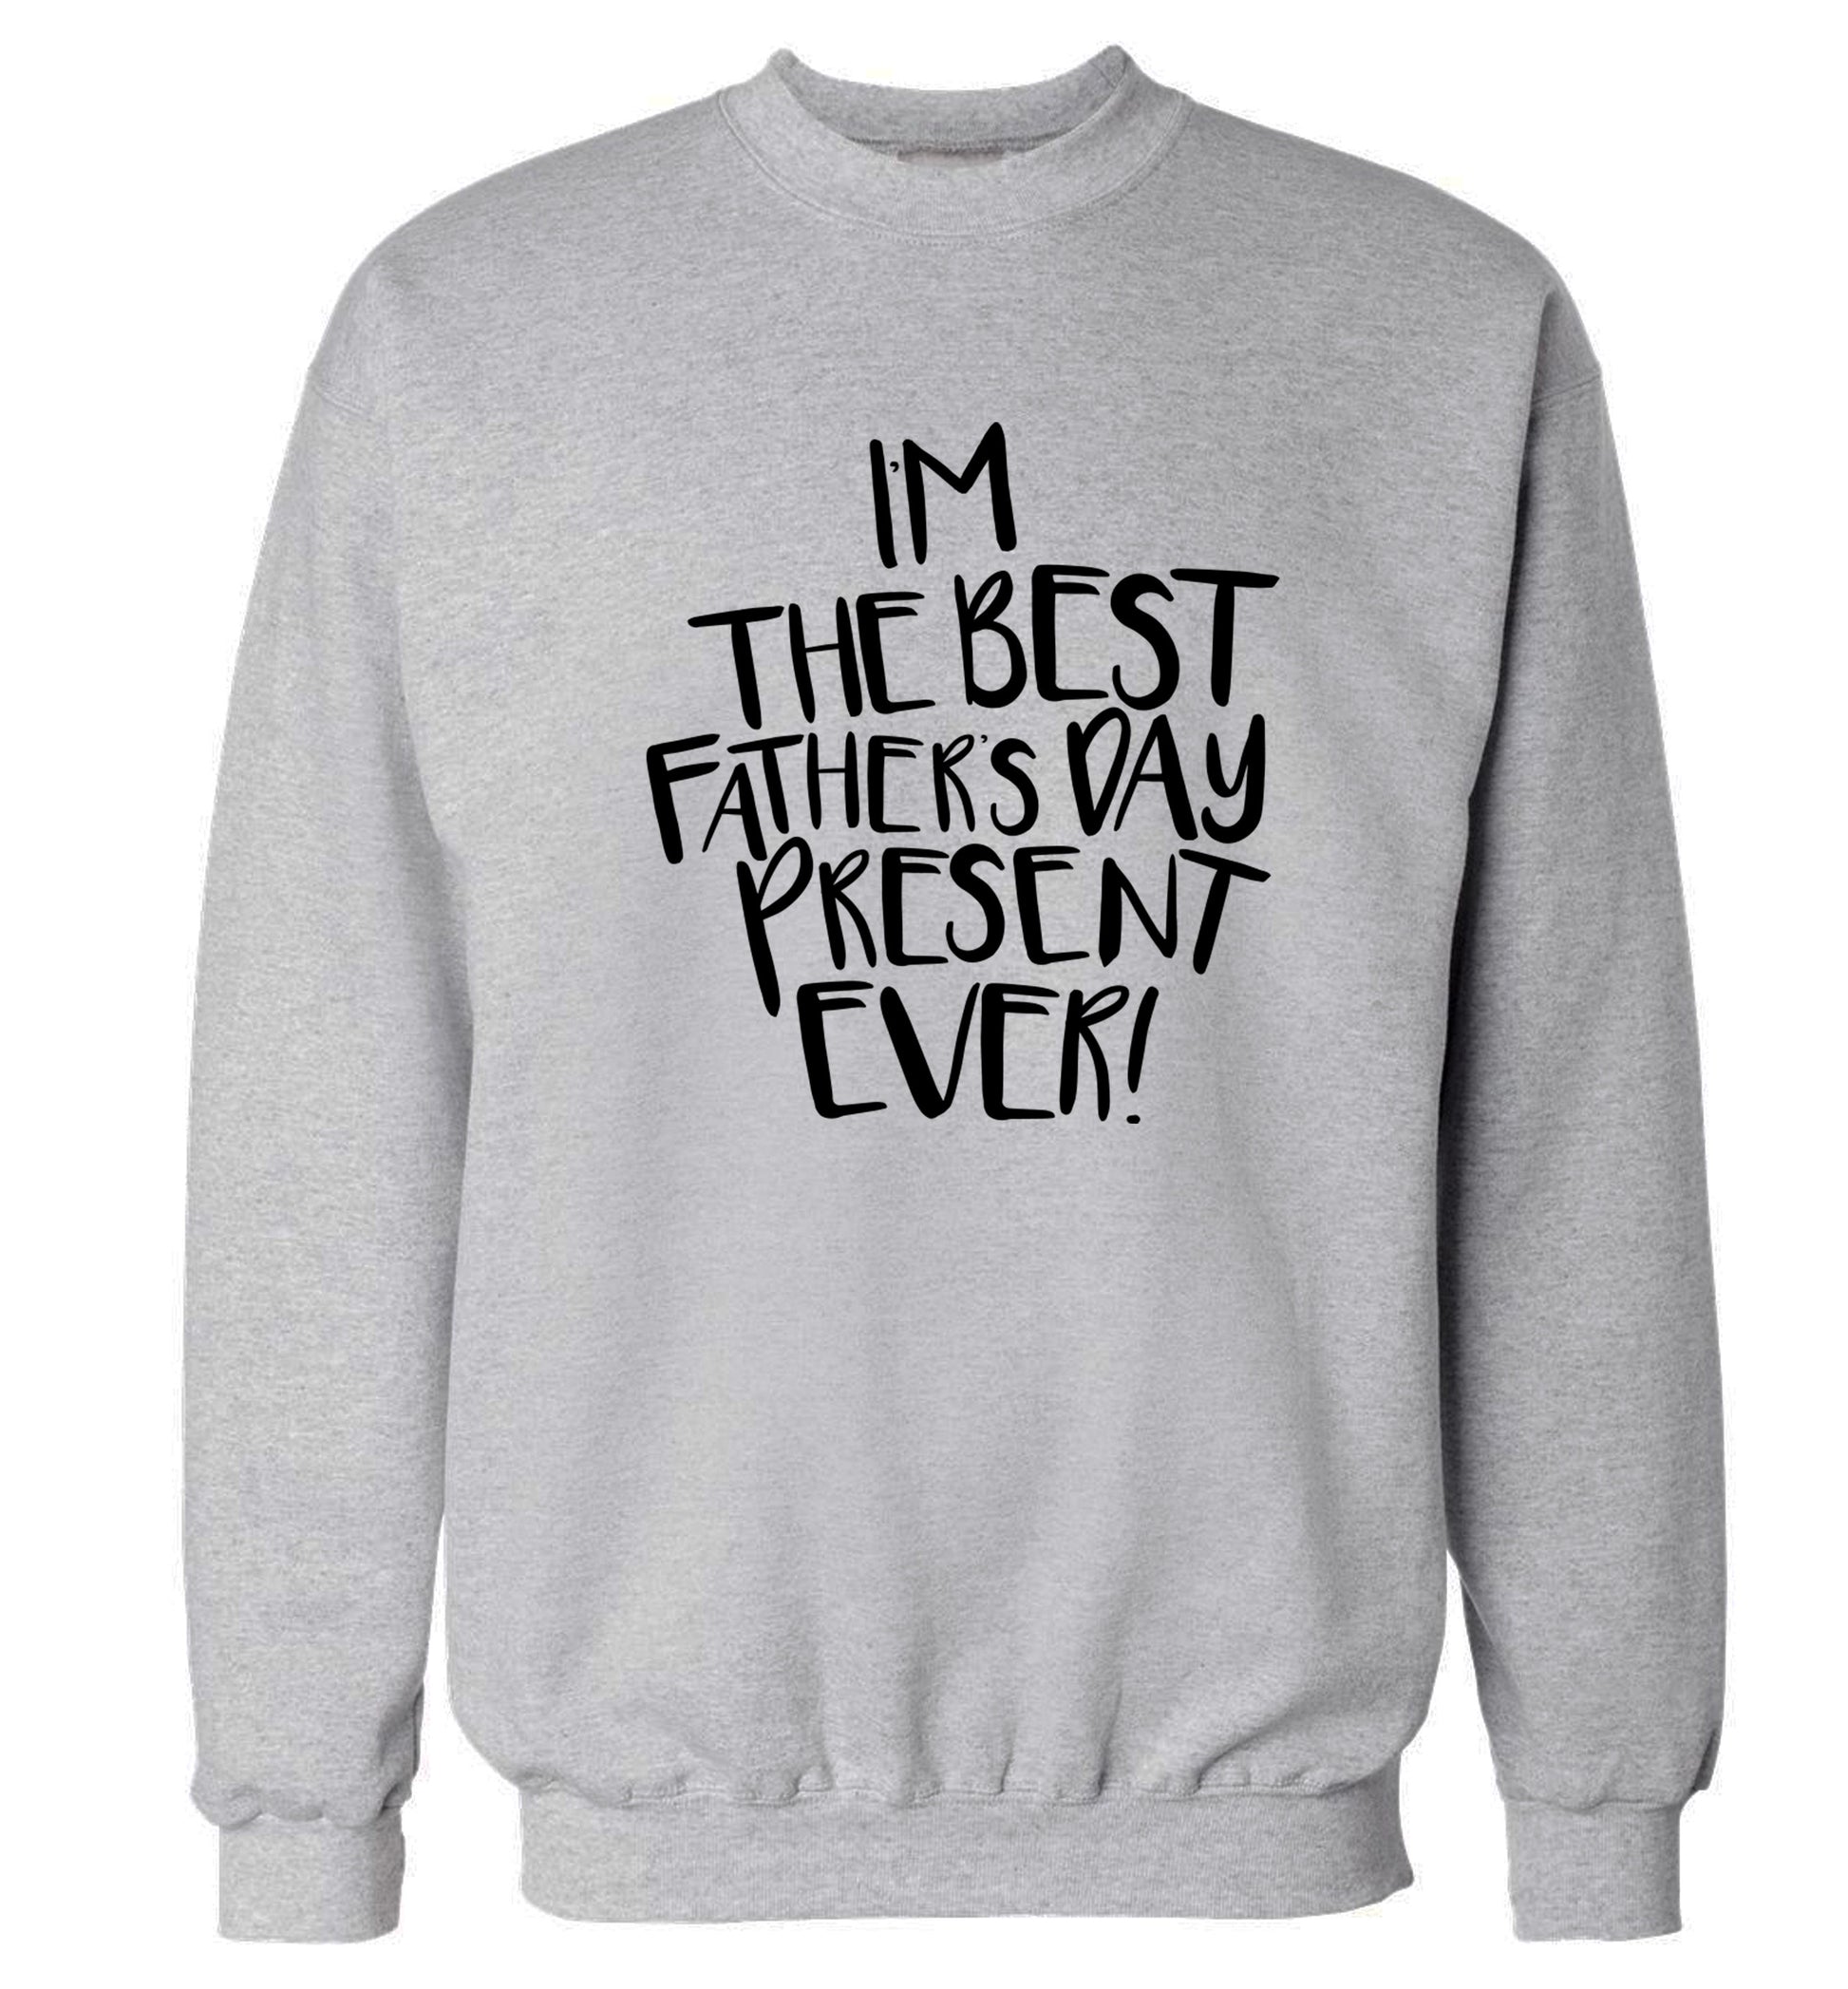 I'm the best father's day present ever! Adult's unisex grey Sweater 2XL